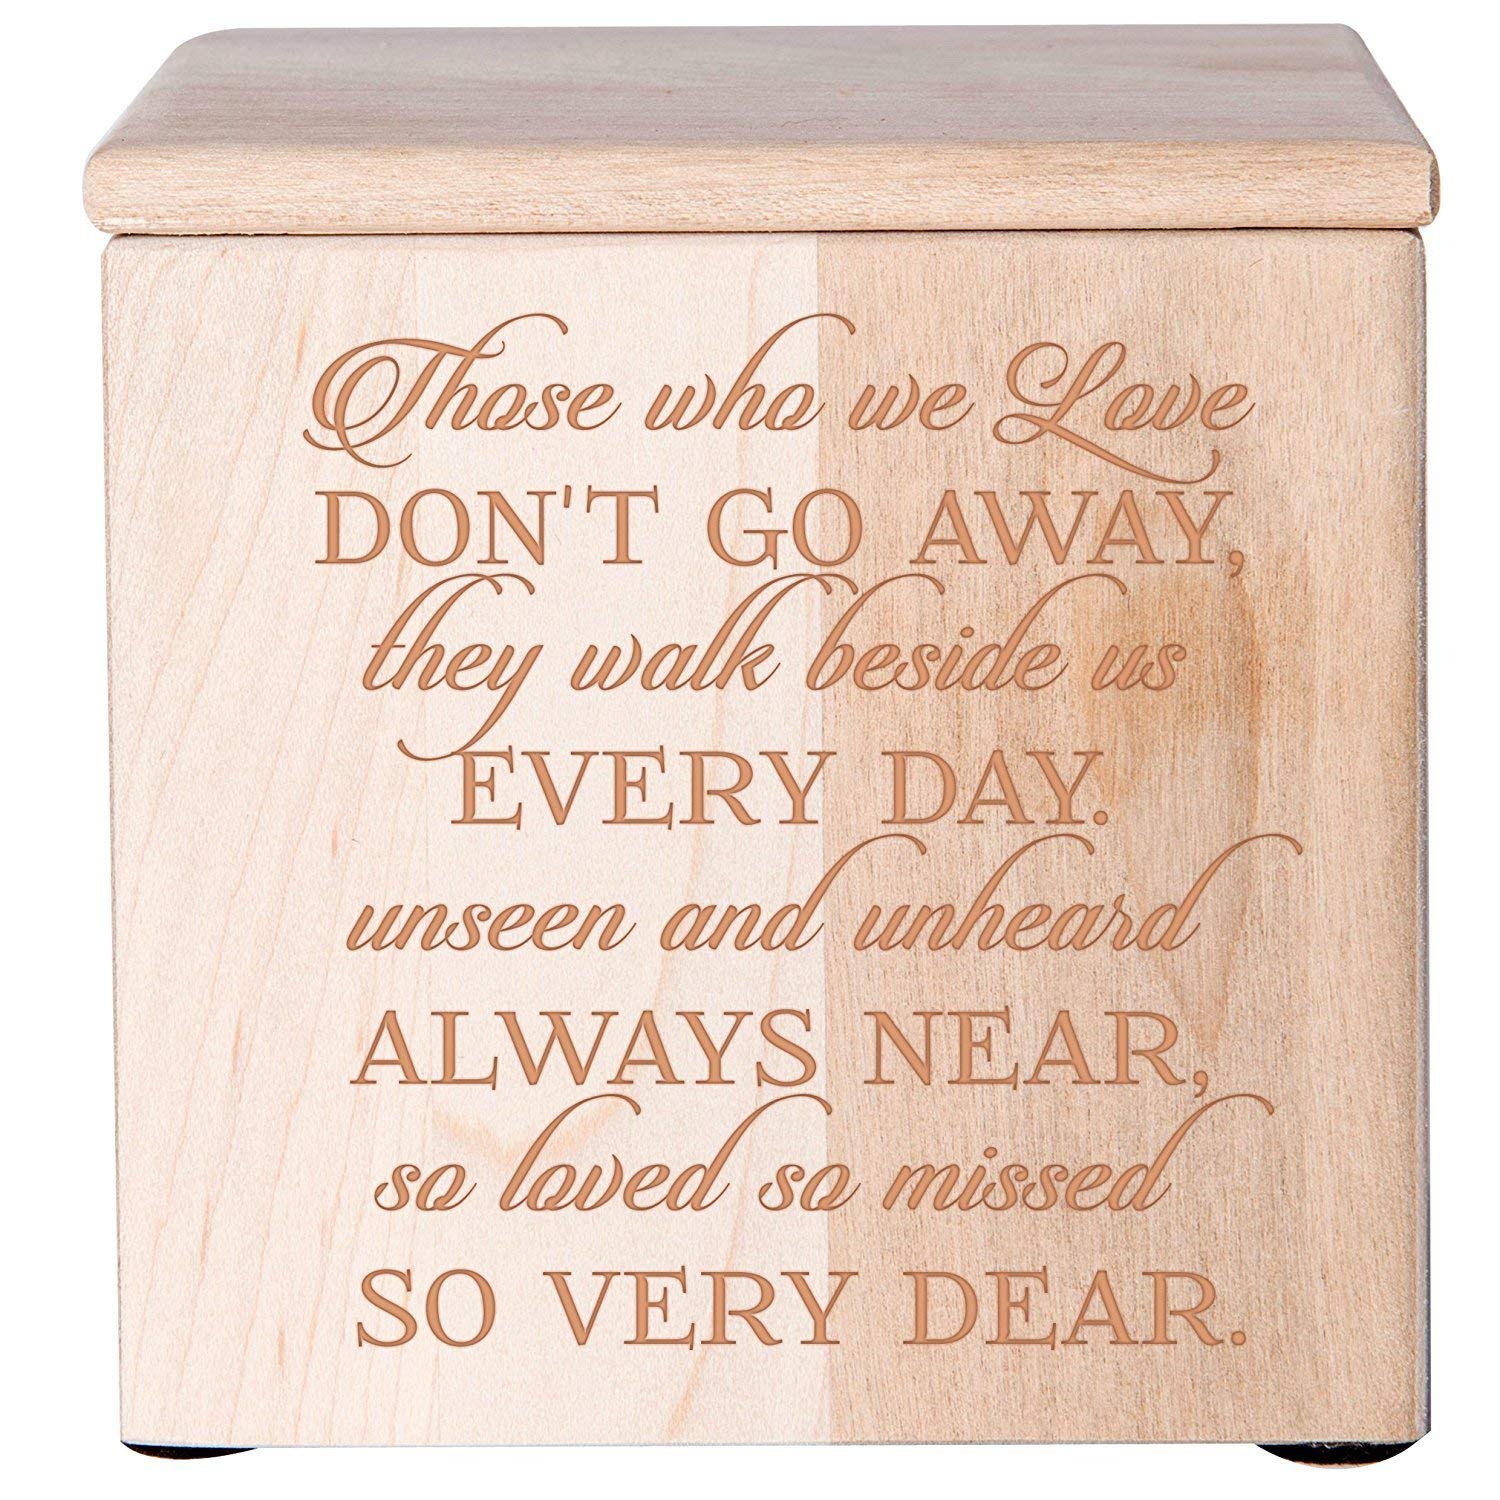 Cremation Urns for Human Ashes Memorial Gift Those we Love